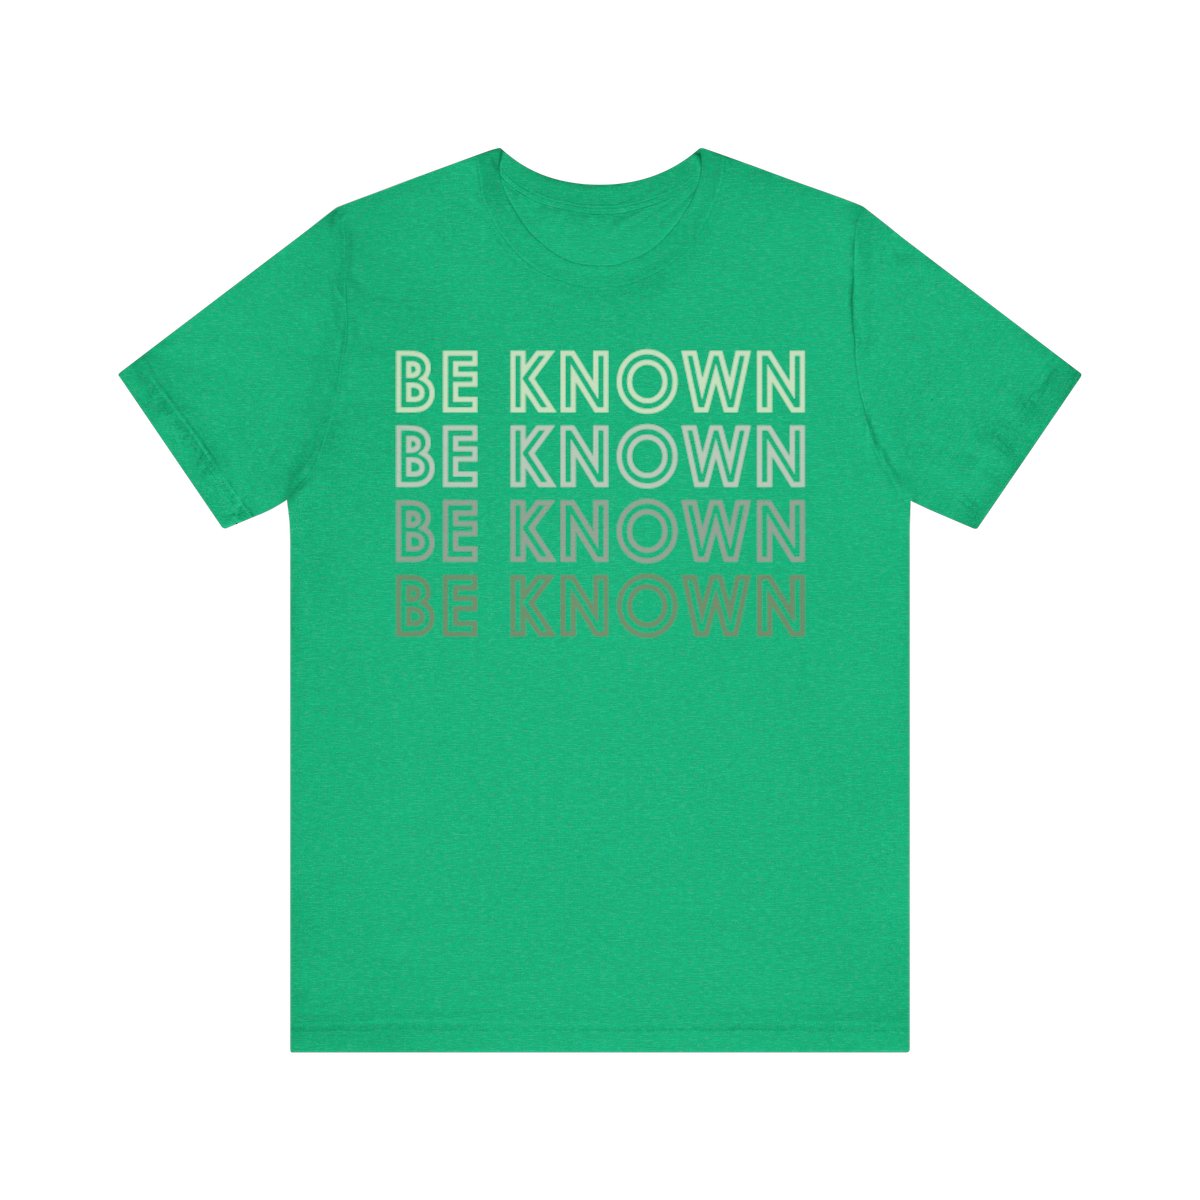 Be Known Women's Retreat 2022 product thumbnail image